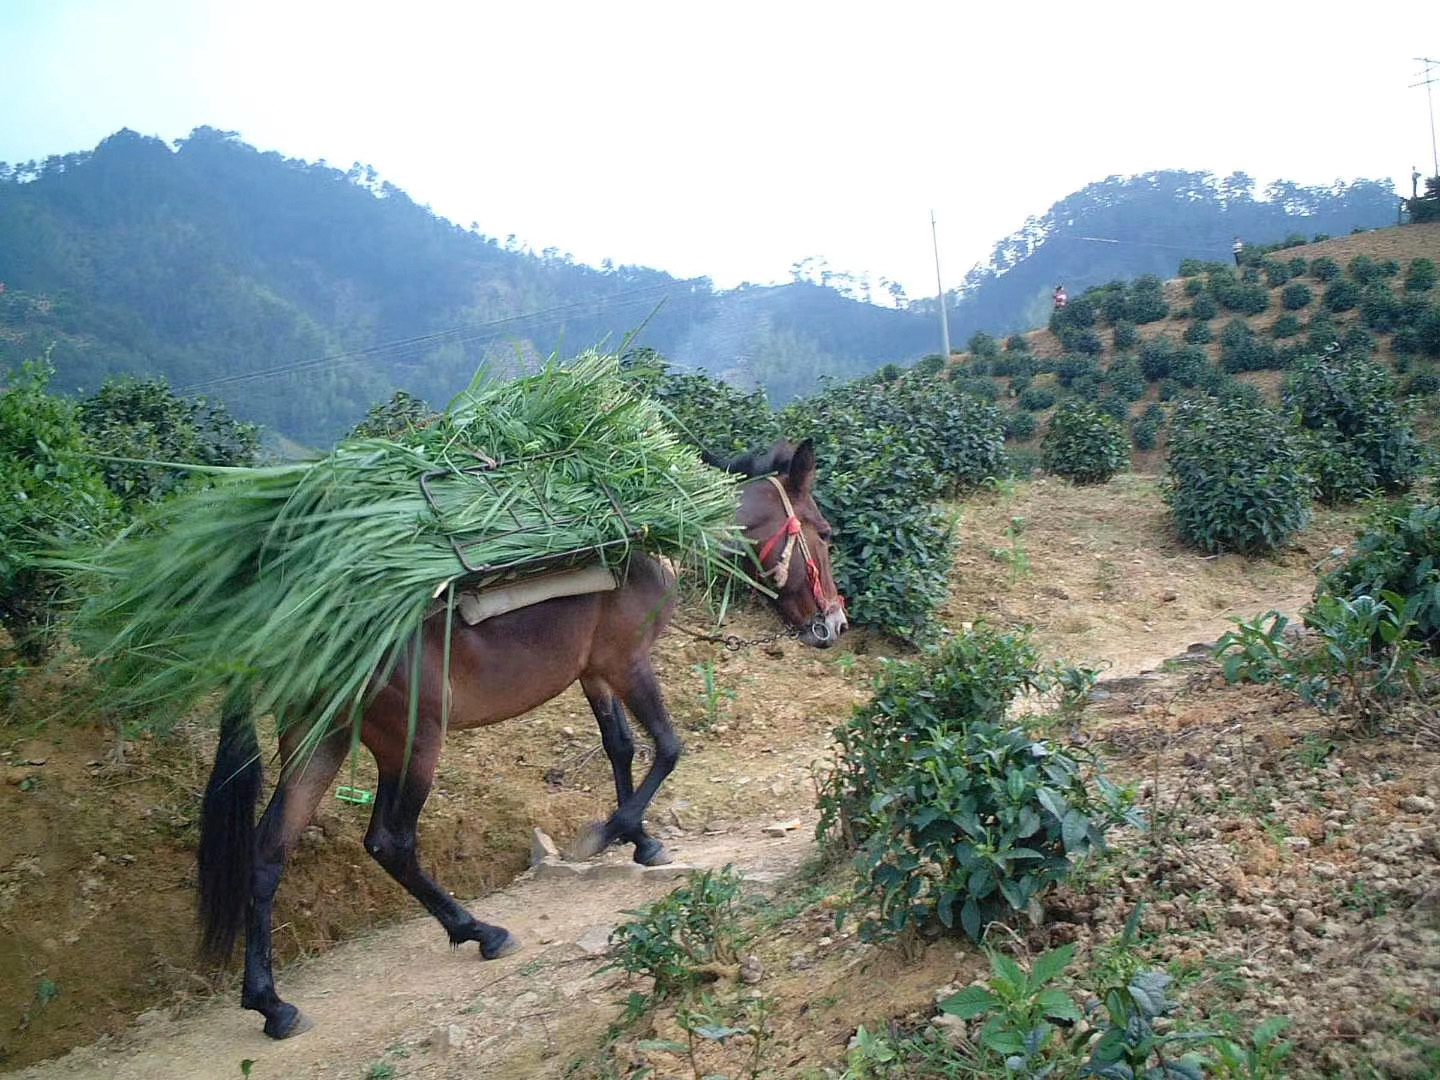 A mule bearing a large stack of greens on its back, making its way up a narrow dirt path that winds between tea bushes in Huangshan.